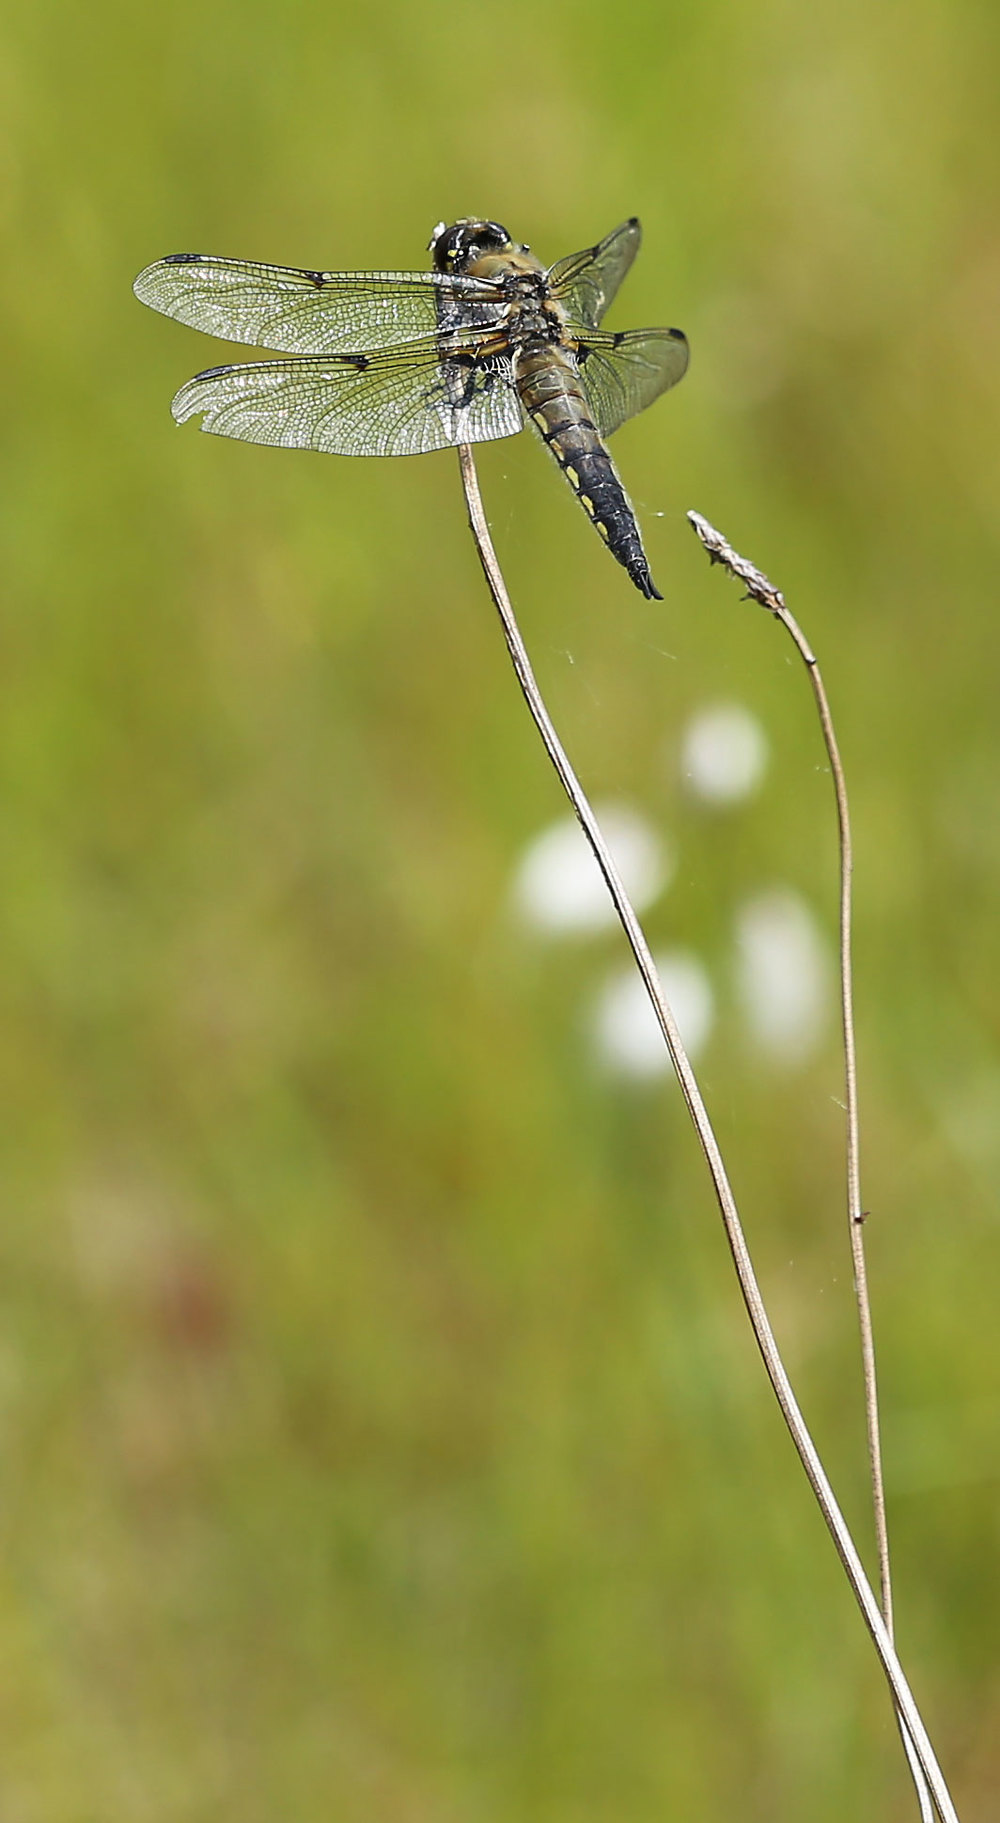 Four-spotted skimmer on an old grass stalk.  